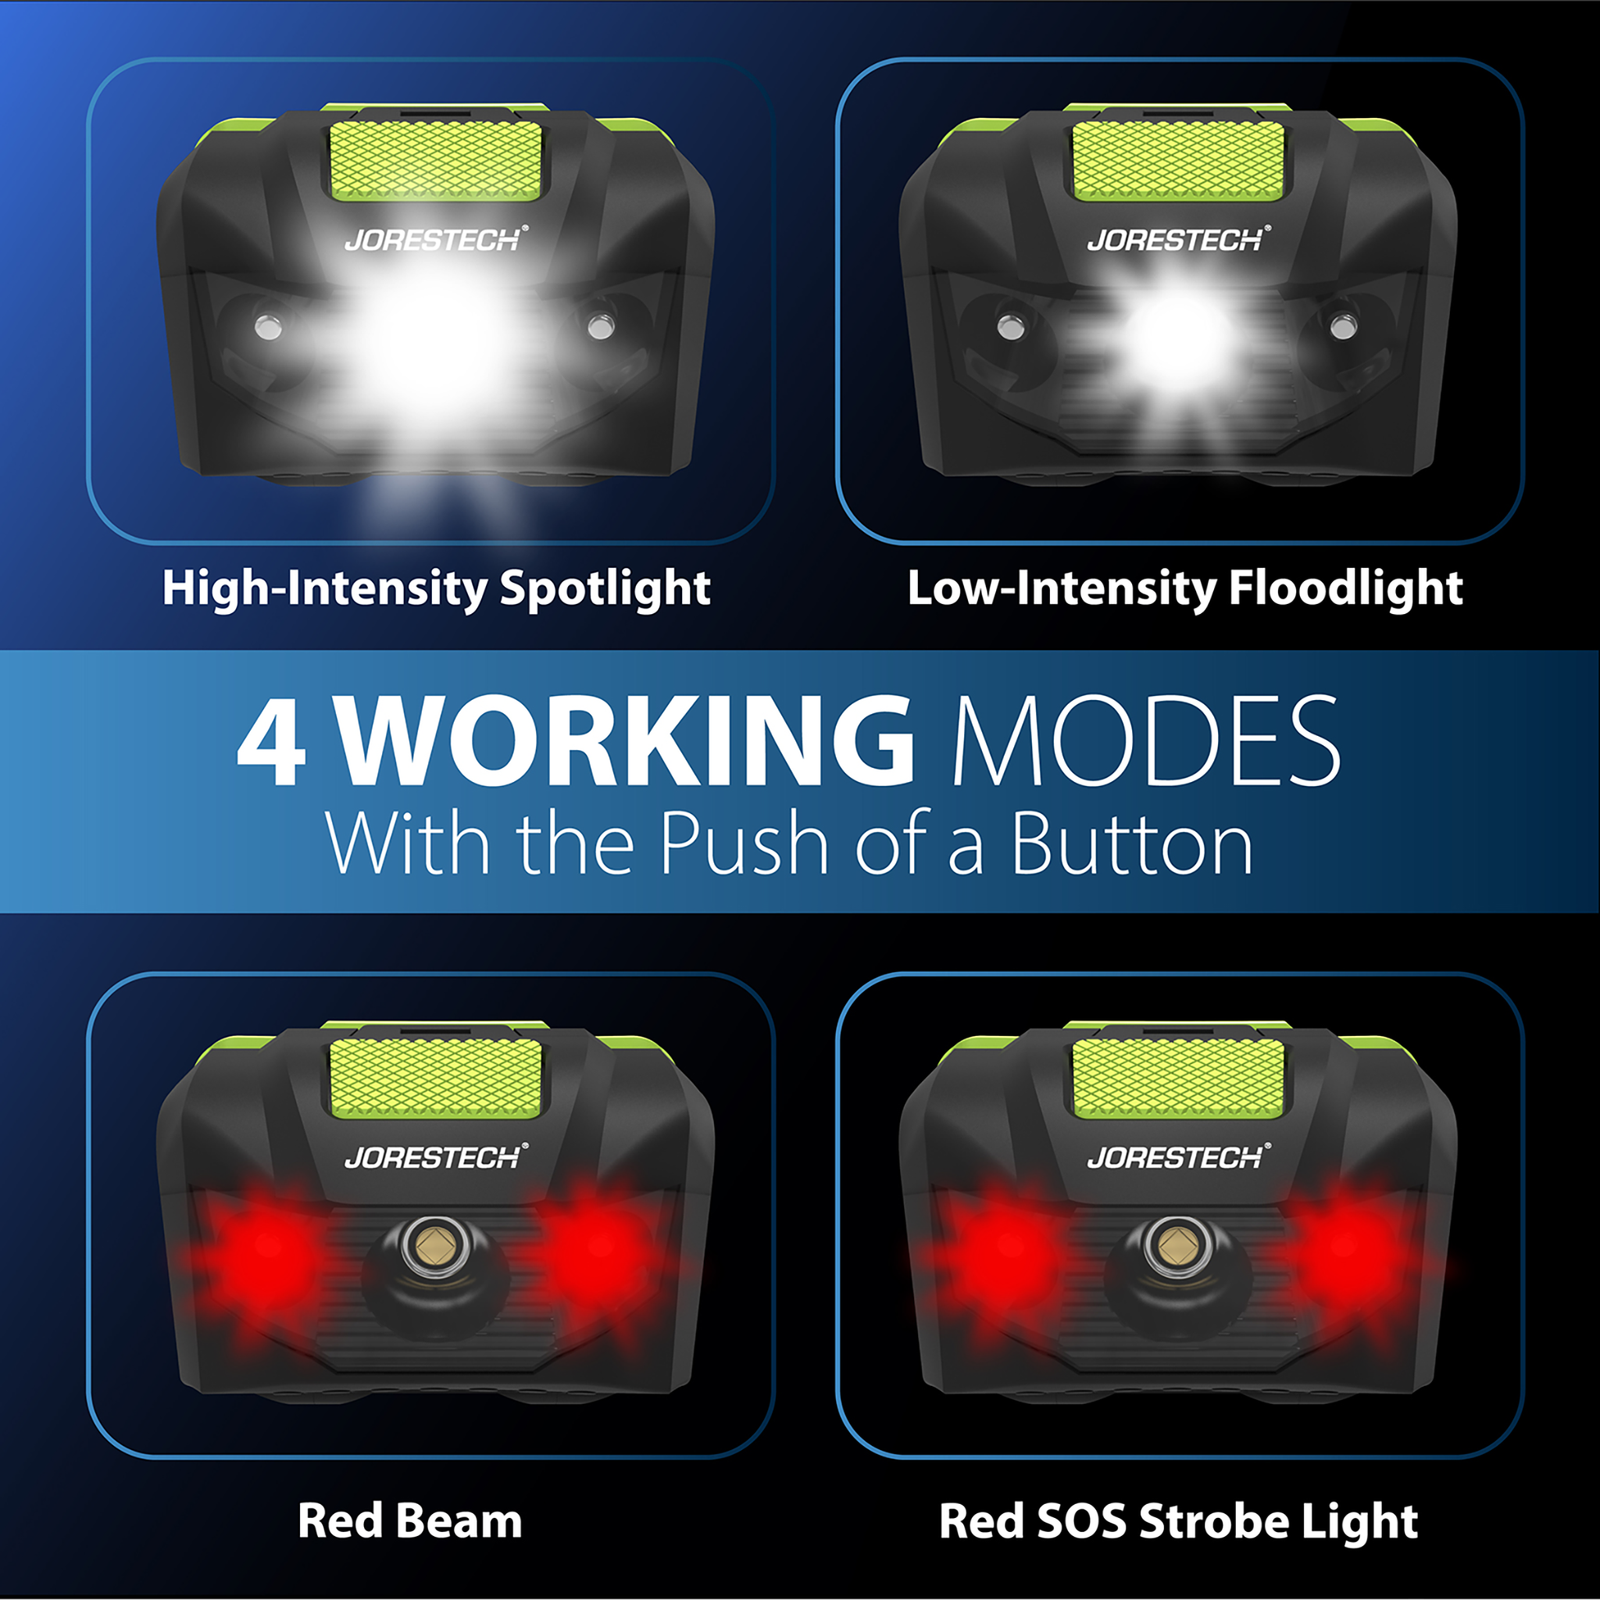 Show 4 different modes that the headlamp has: High intensity spotlight, Low intensity floodlight, red beam and red SOS stroke light